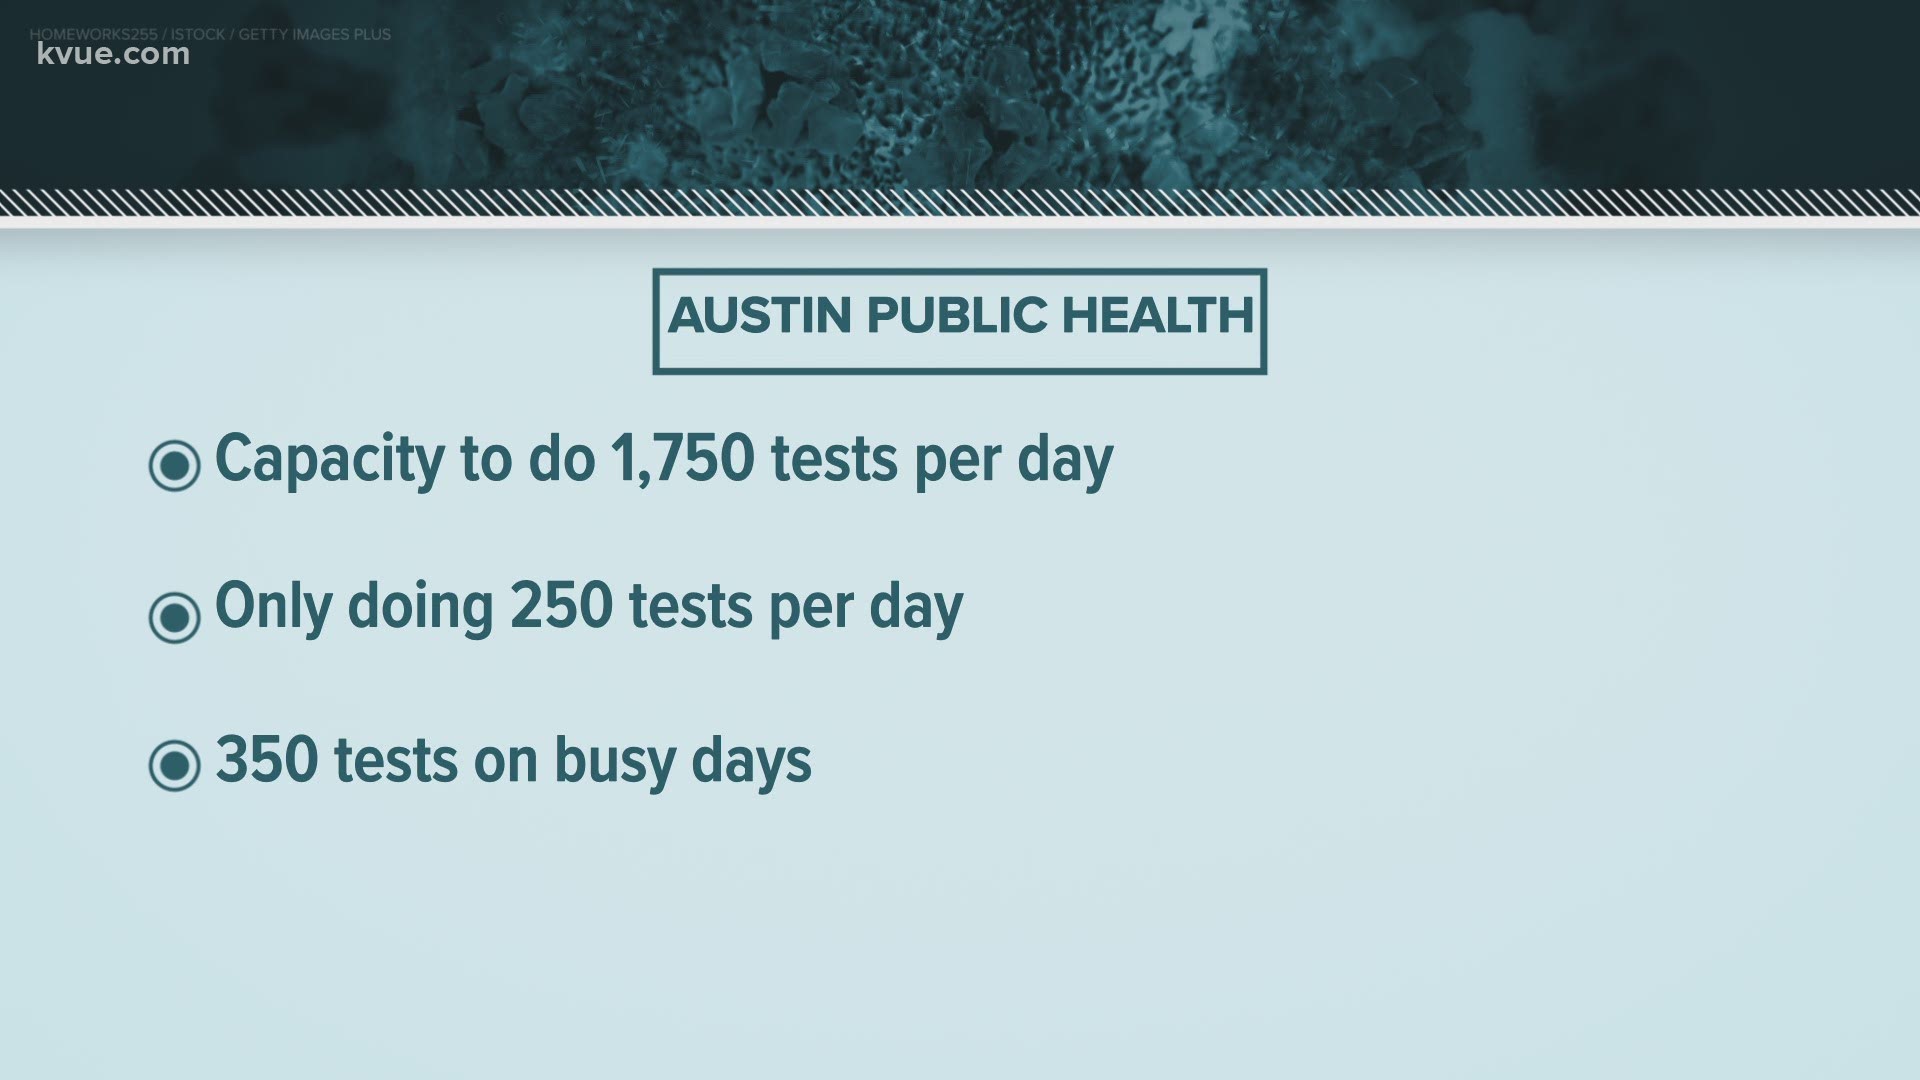 When the pandemic first hit, cities suffered from a shortage of tests. Now Austin area officials say they have many more tests than people taking them.